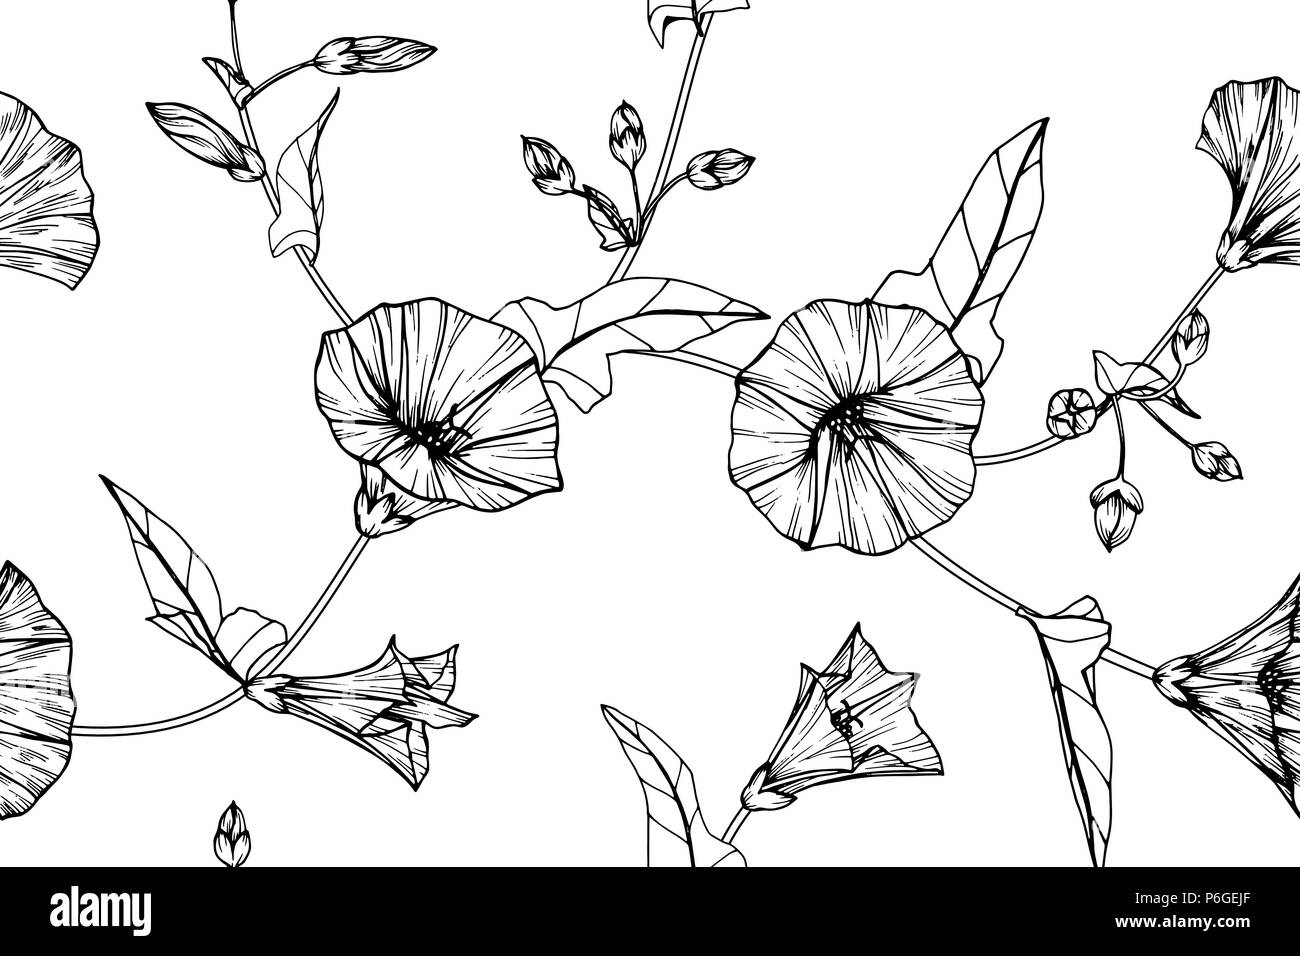 Seamless Morning glory flower pattern background. Black and white with drawing line art illustration. Stock Vector